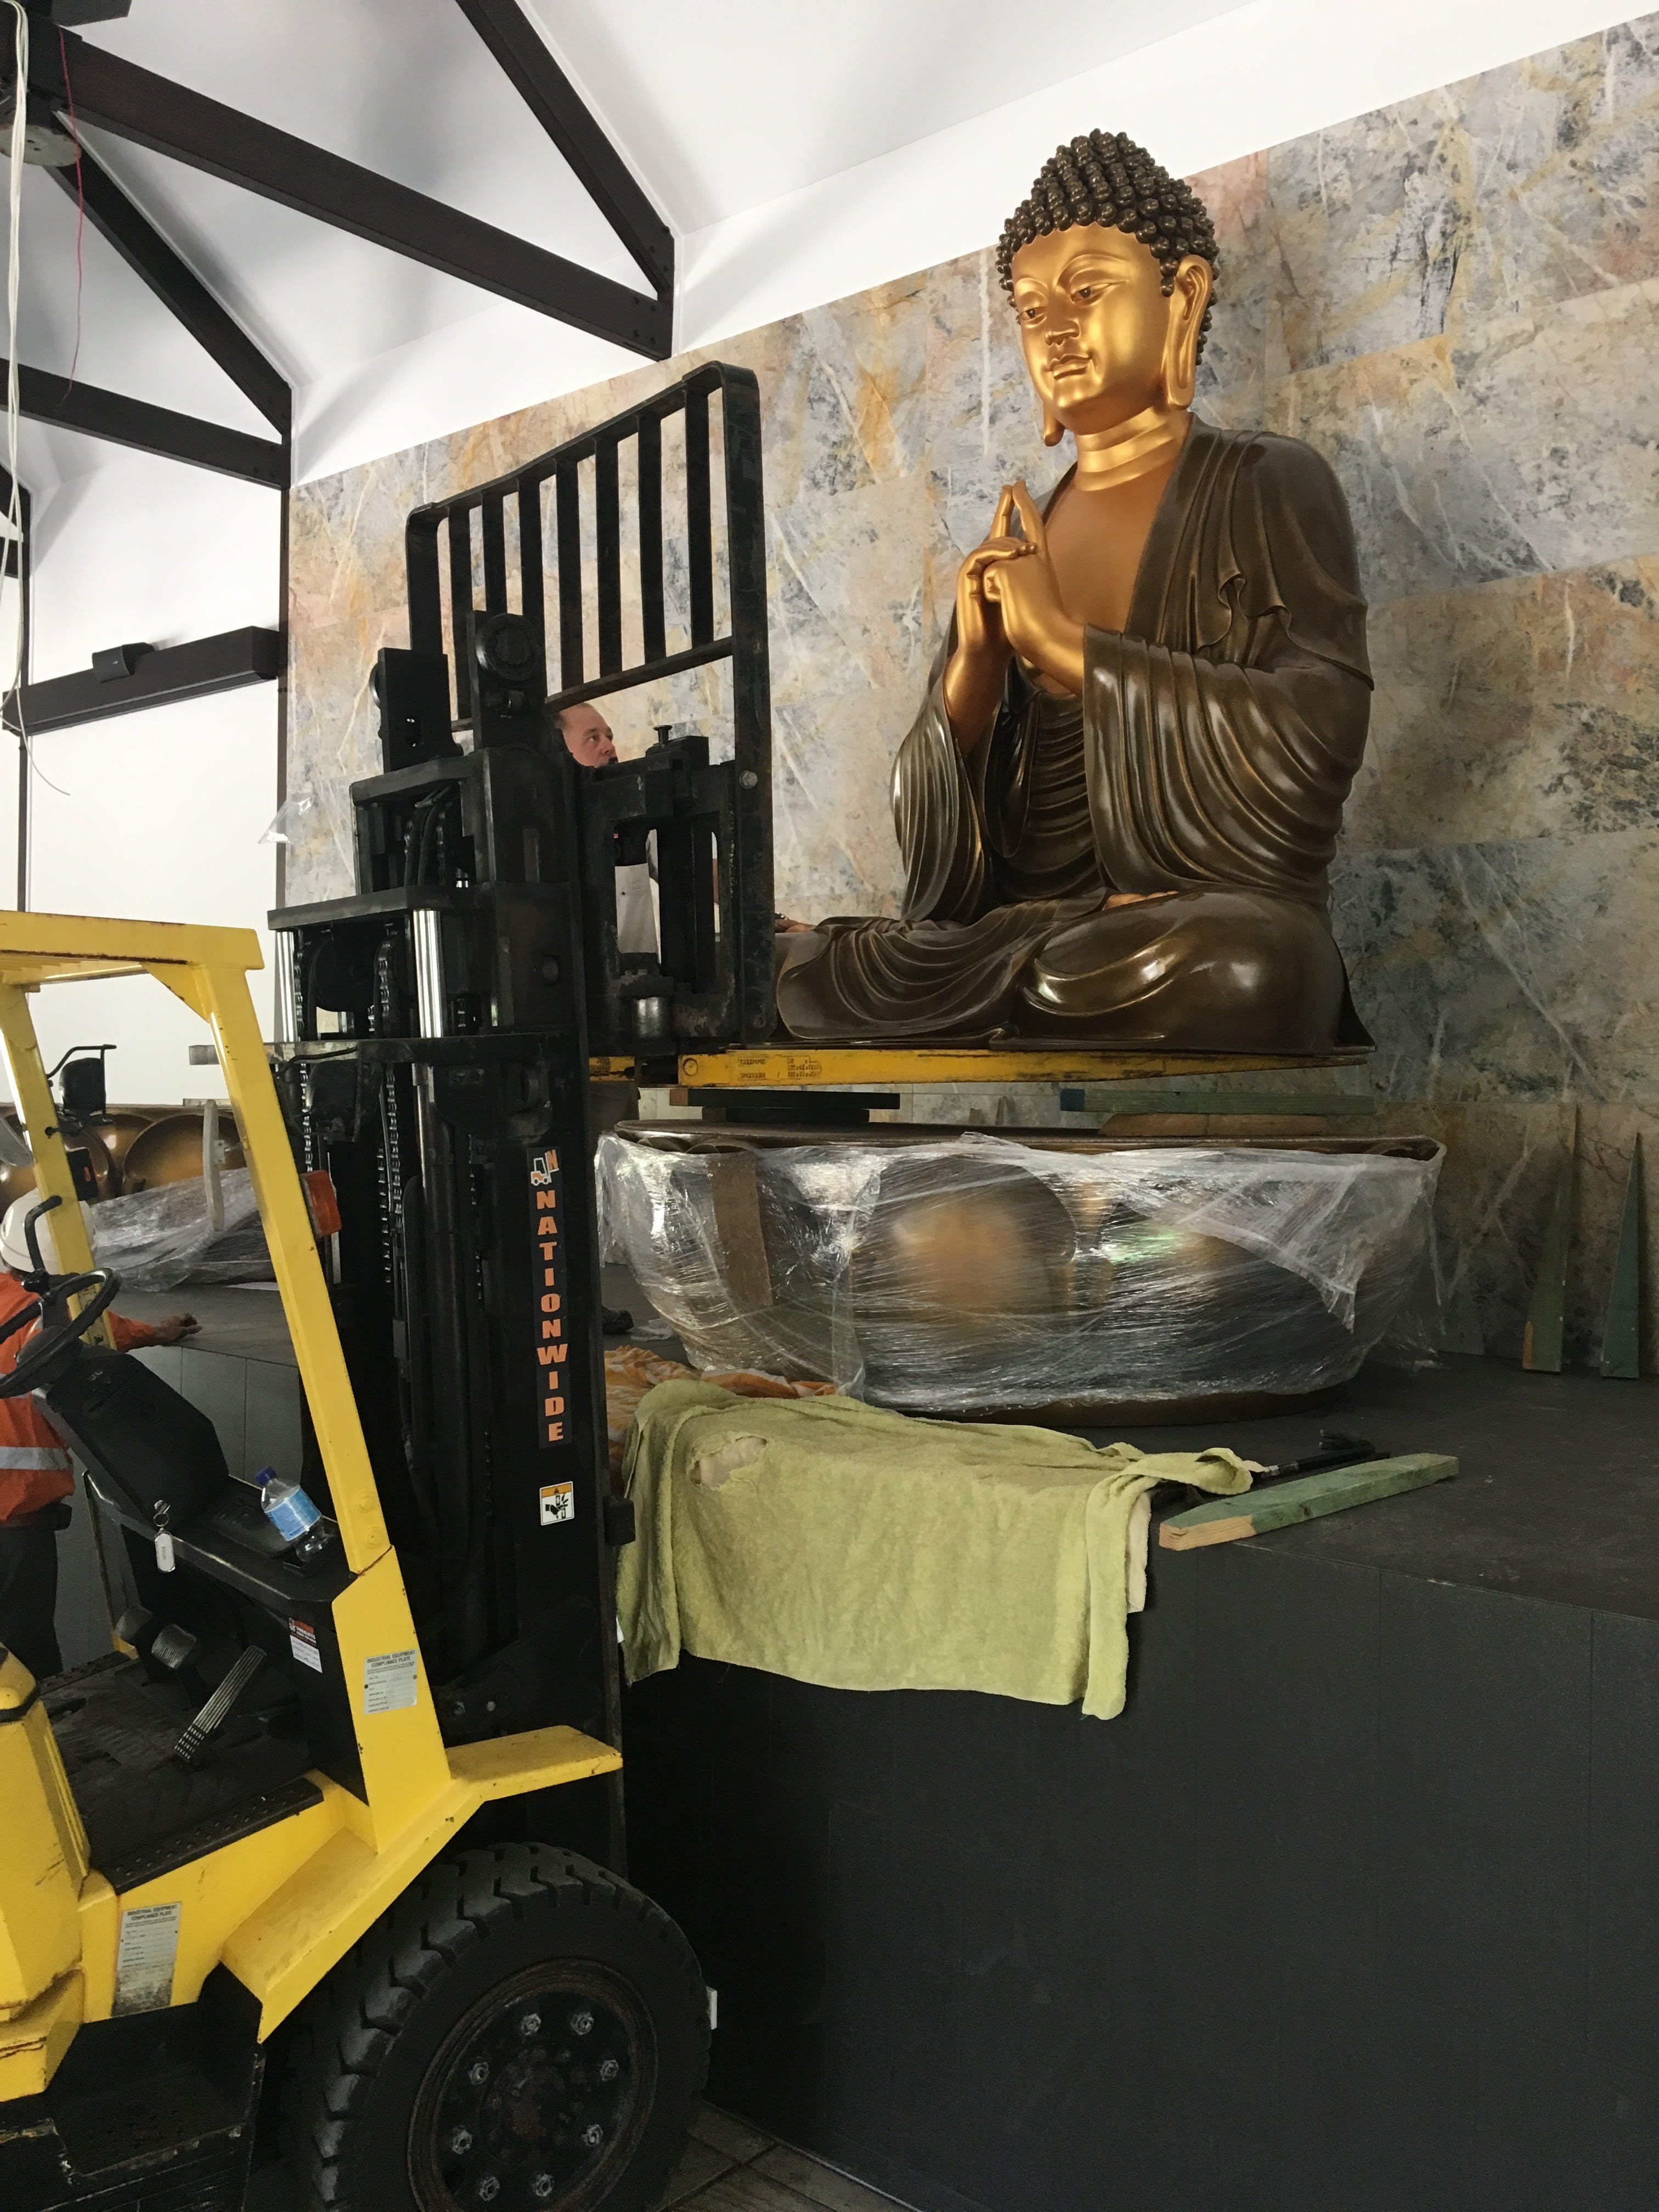 We Do Any Thing No Job To Big Or To Small Operator Sevice And A Very Special Job Insulation Of Our New Budders To Our Local Temple A Very Special Job For Some Very Special People .